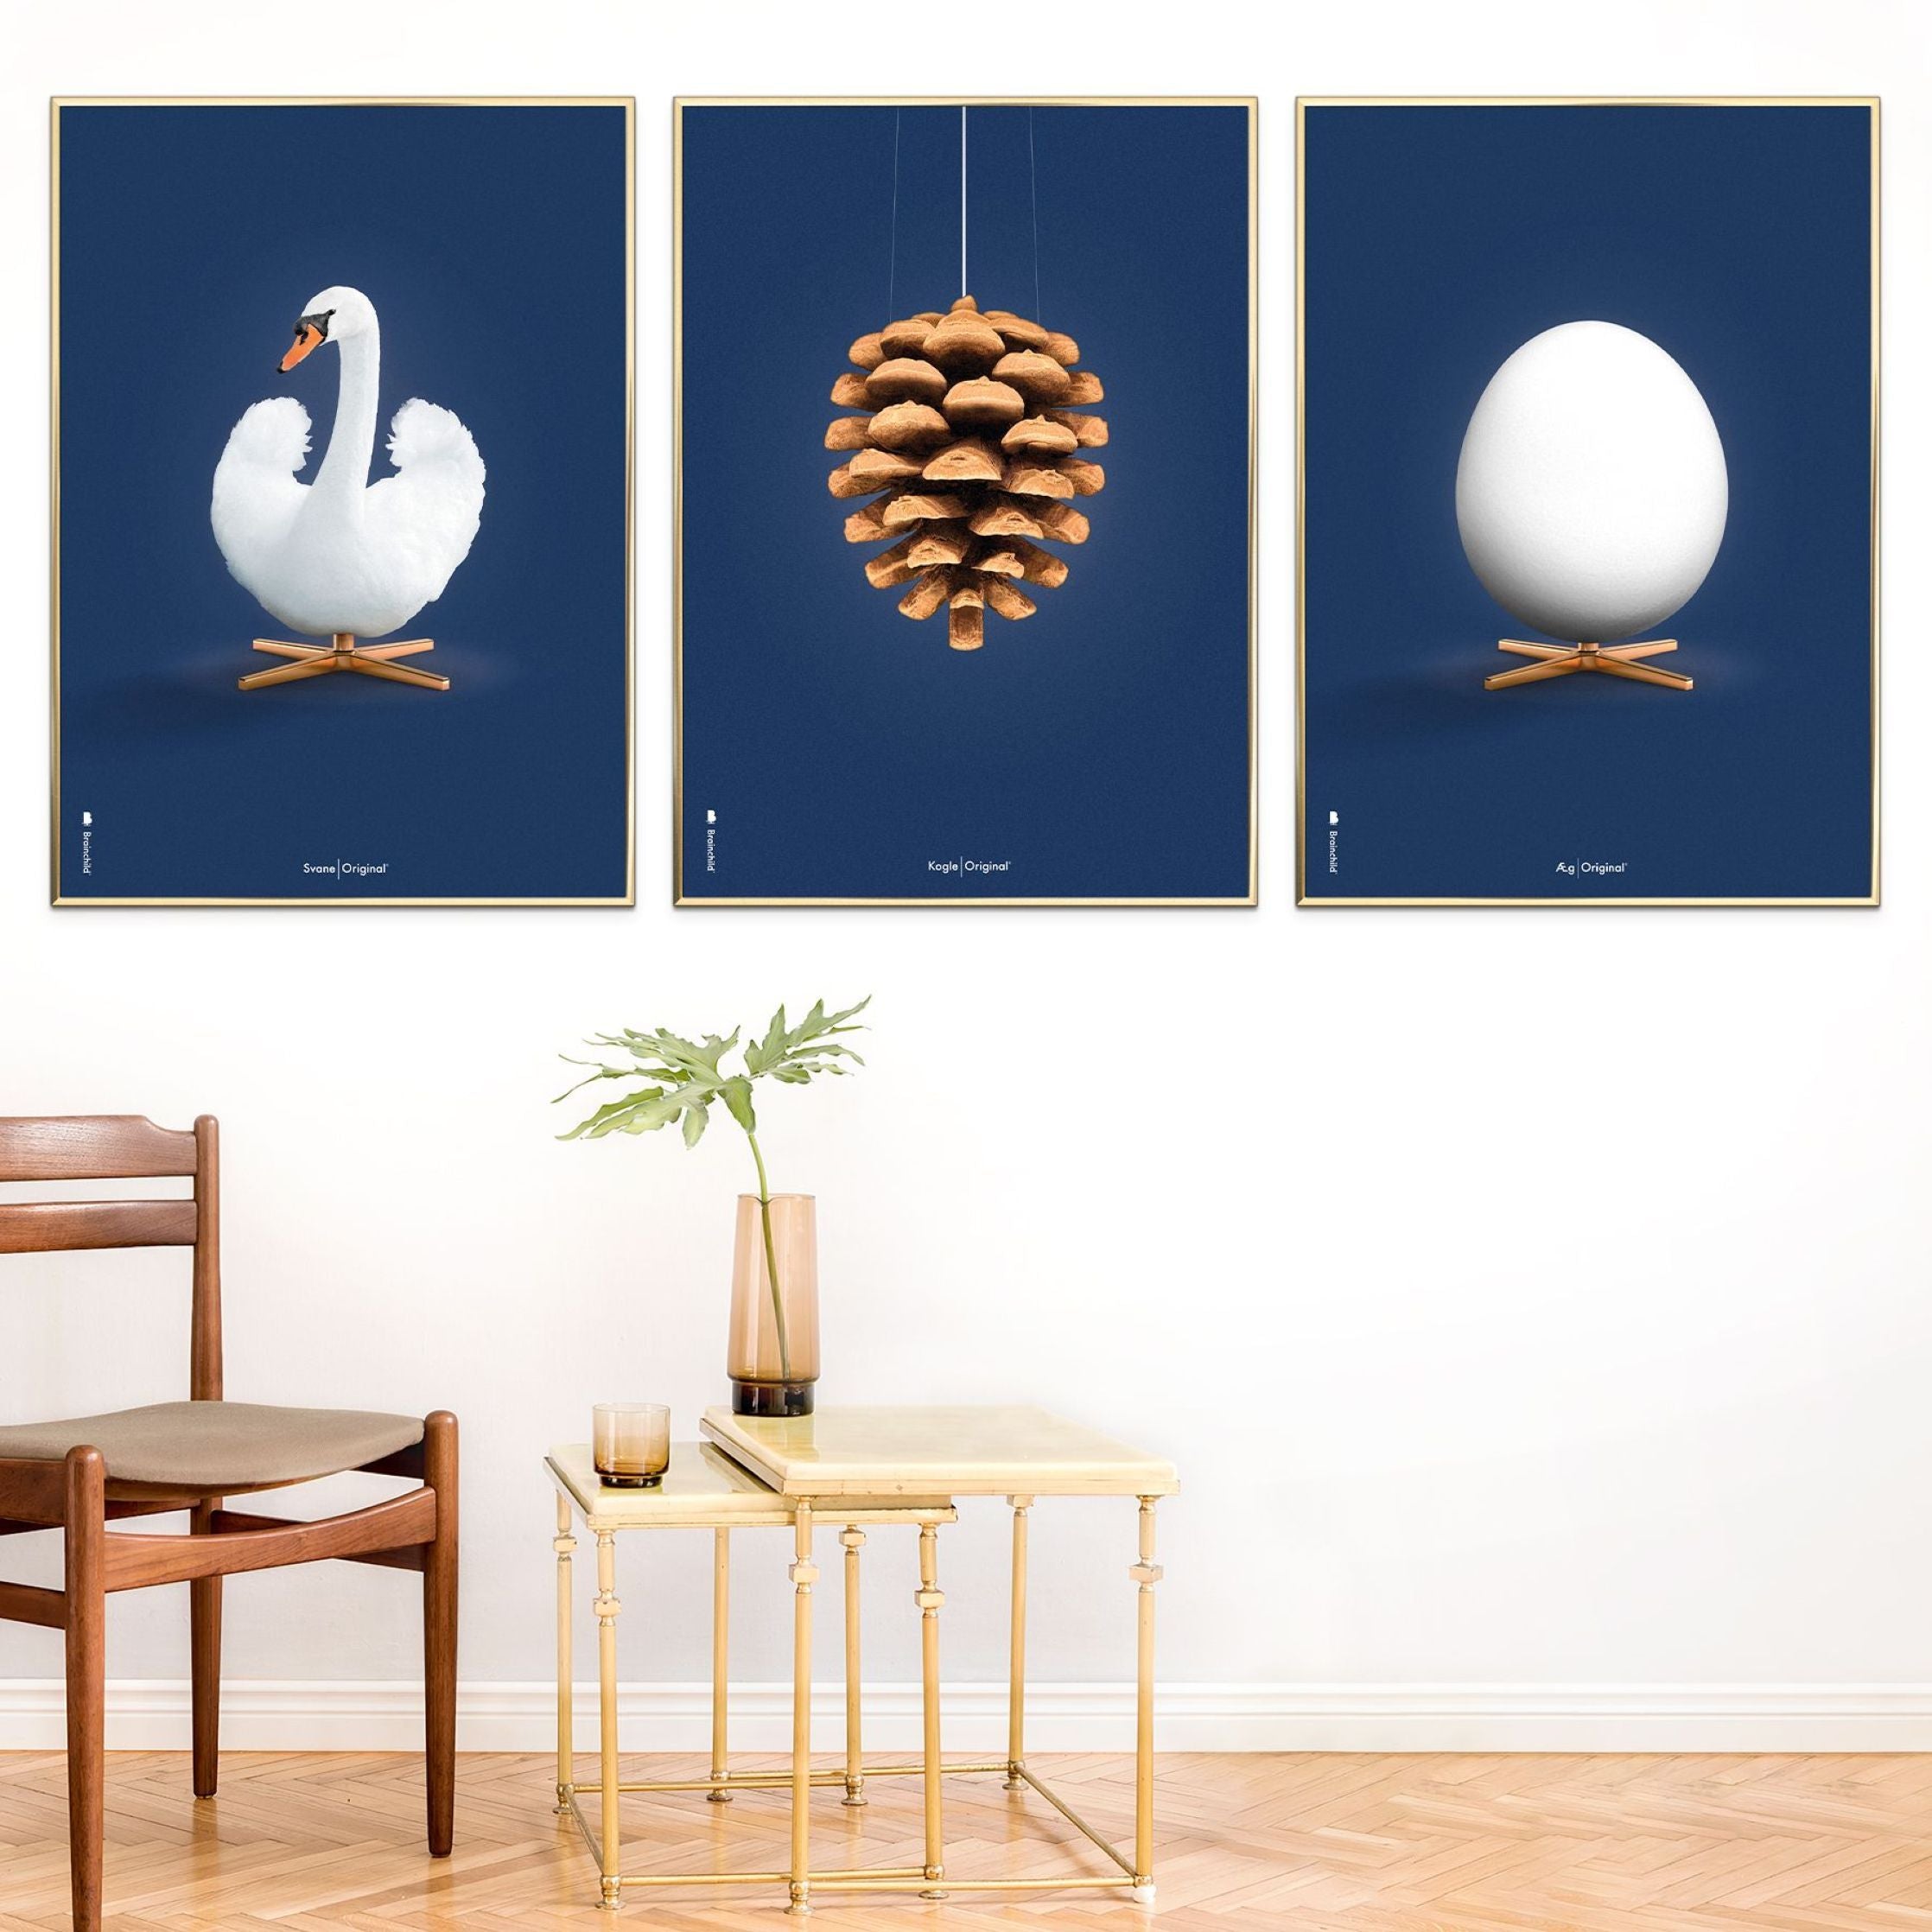 Brainchild Egg Classic Poster, Frame In Black Lacquered Wood A5, Dark Blue Background